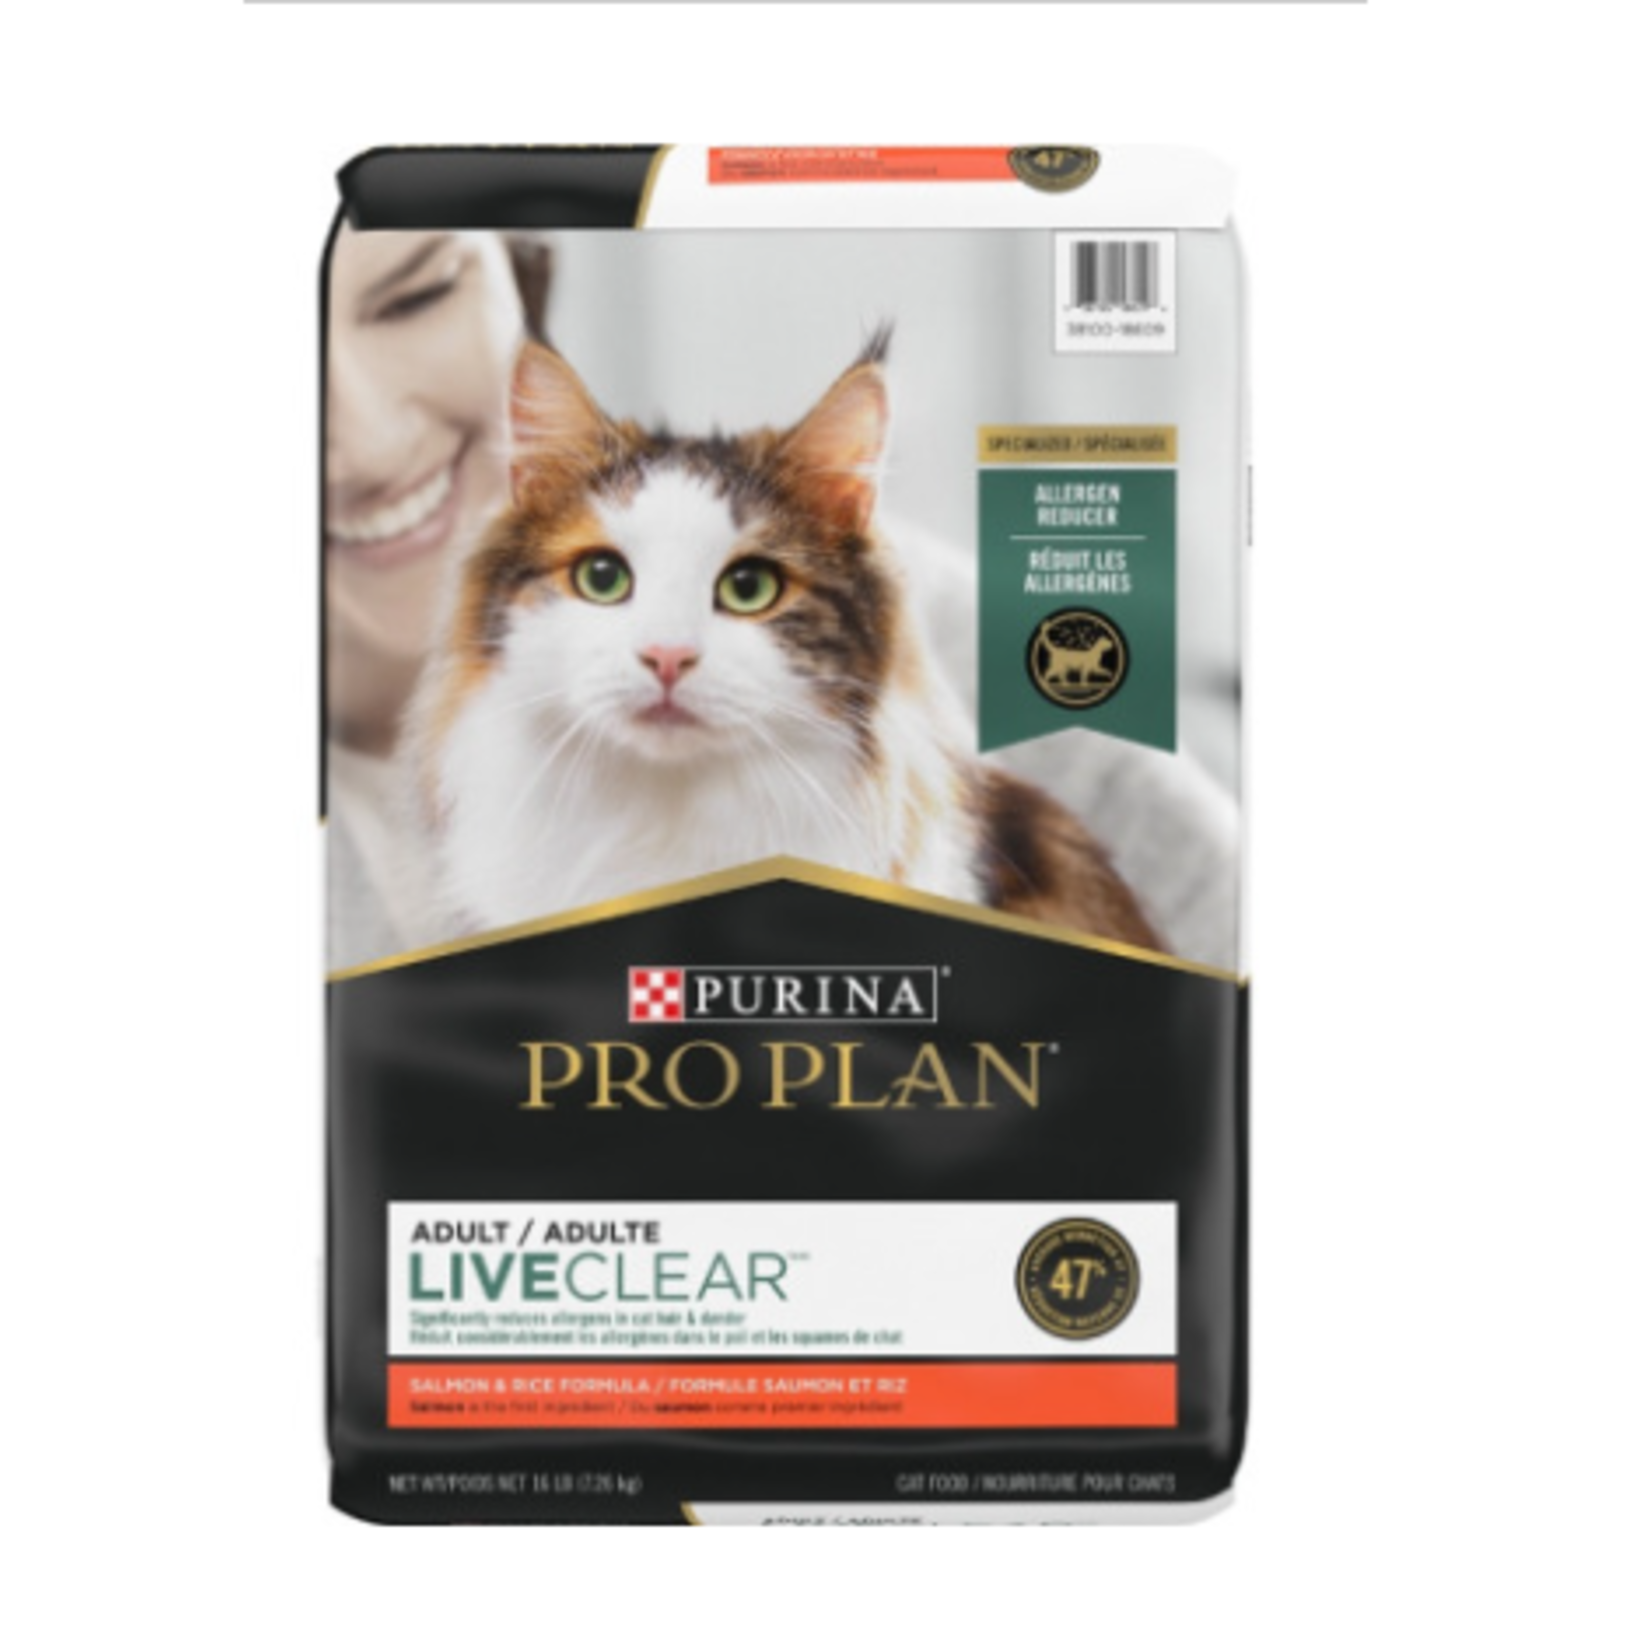 Purina ProPlan - LiveClear - Saumon - 7 lb